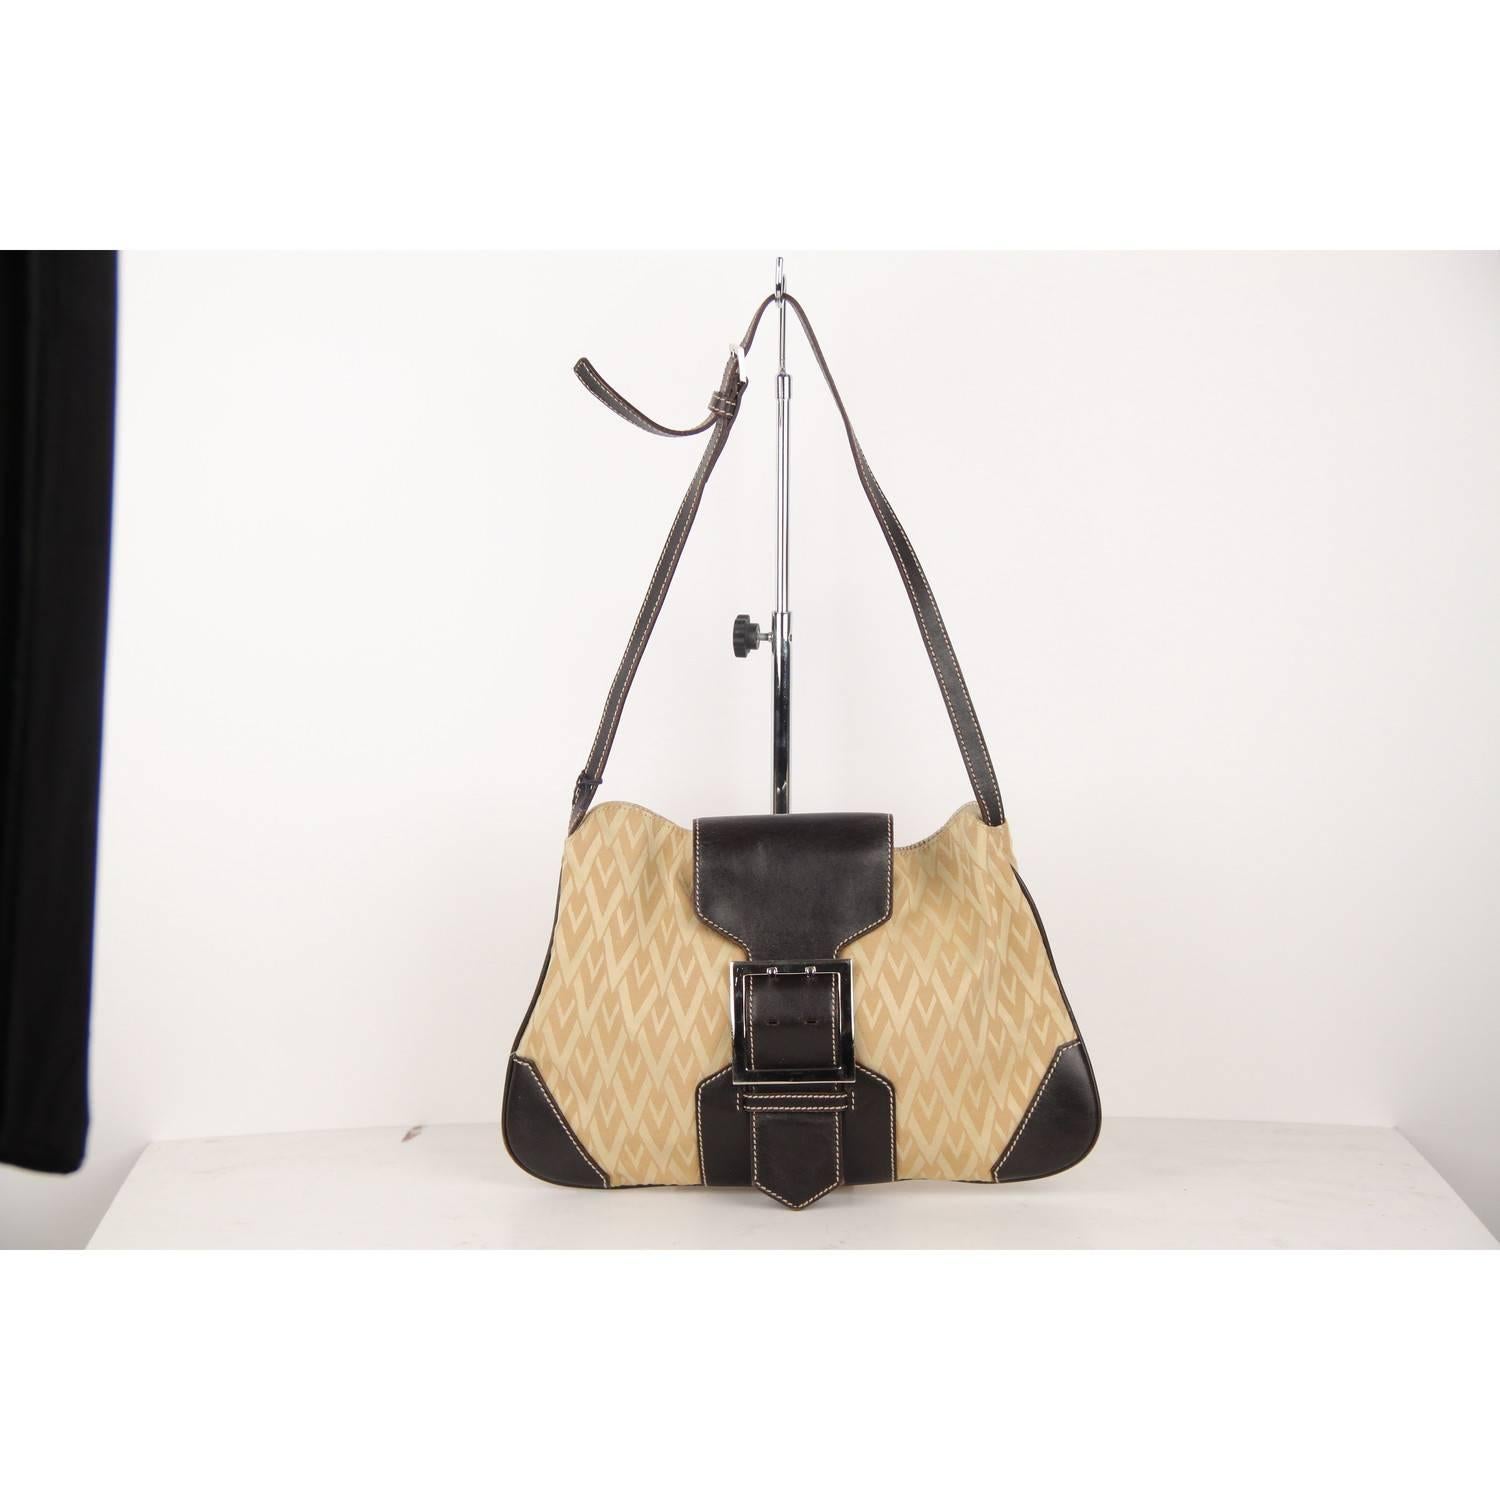 - Valentino Garavani Beige V-Fabric Canvas Riedition SS '68 Collection Hobo Bag
- Beige V-fabric canvas with black leather trim
- the V-fabric is a reproduction of an original 1968 design-vintage inspired
- Fold over flap with buckle detailing
-